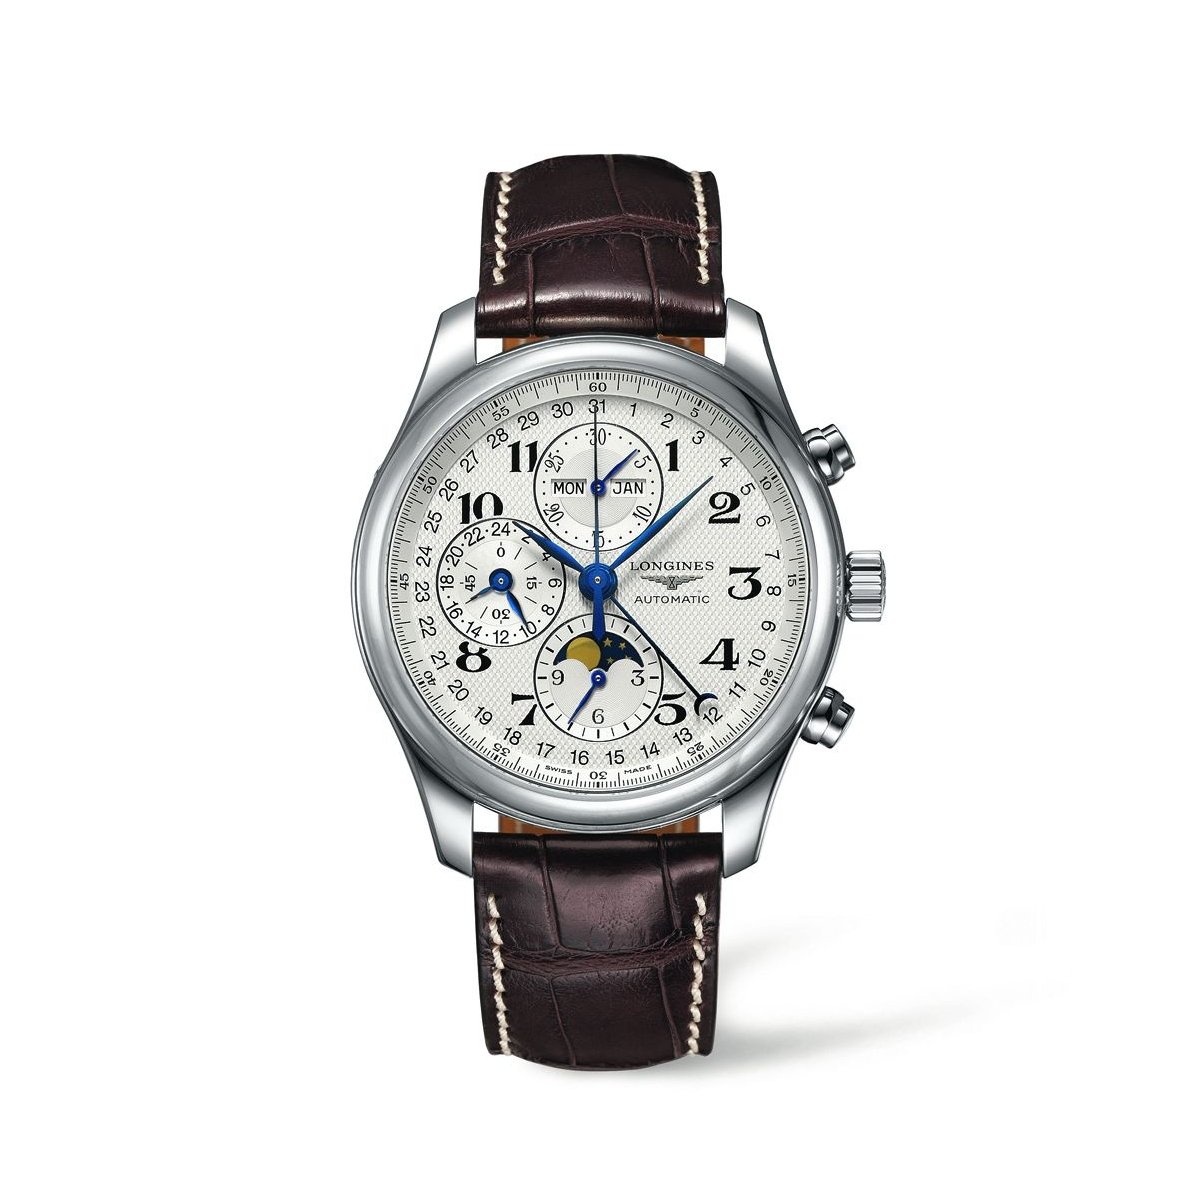 The Longines Master Collection 42 mm herreur